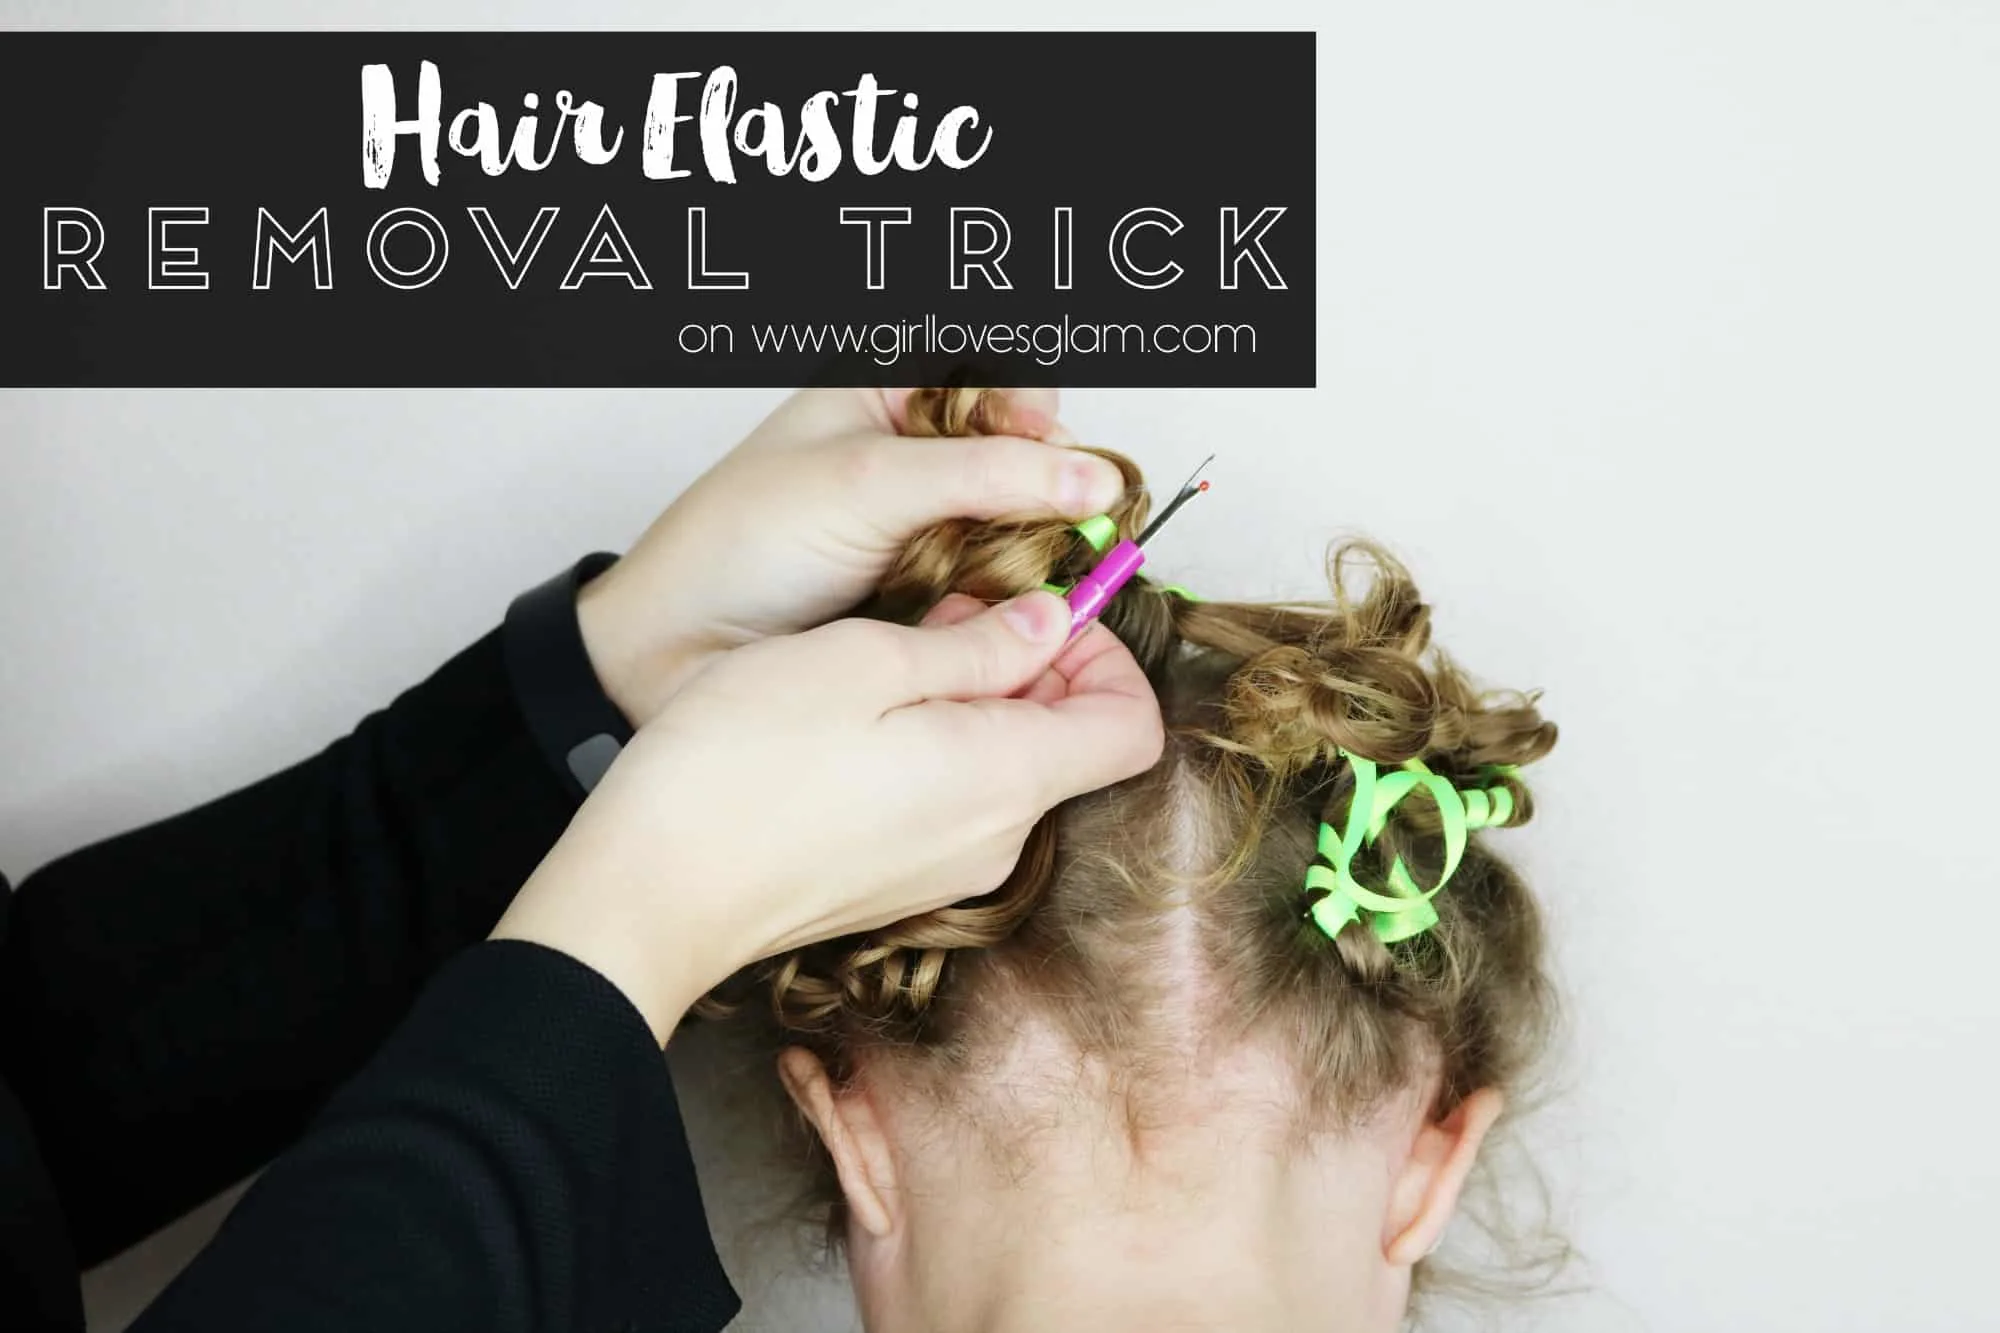 youtube hair elastic removal trick